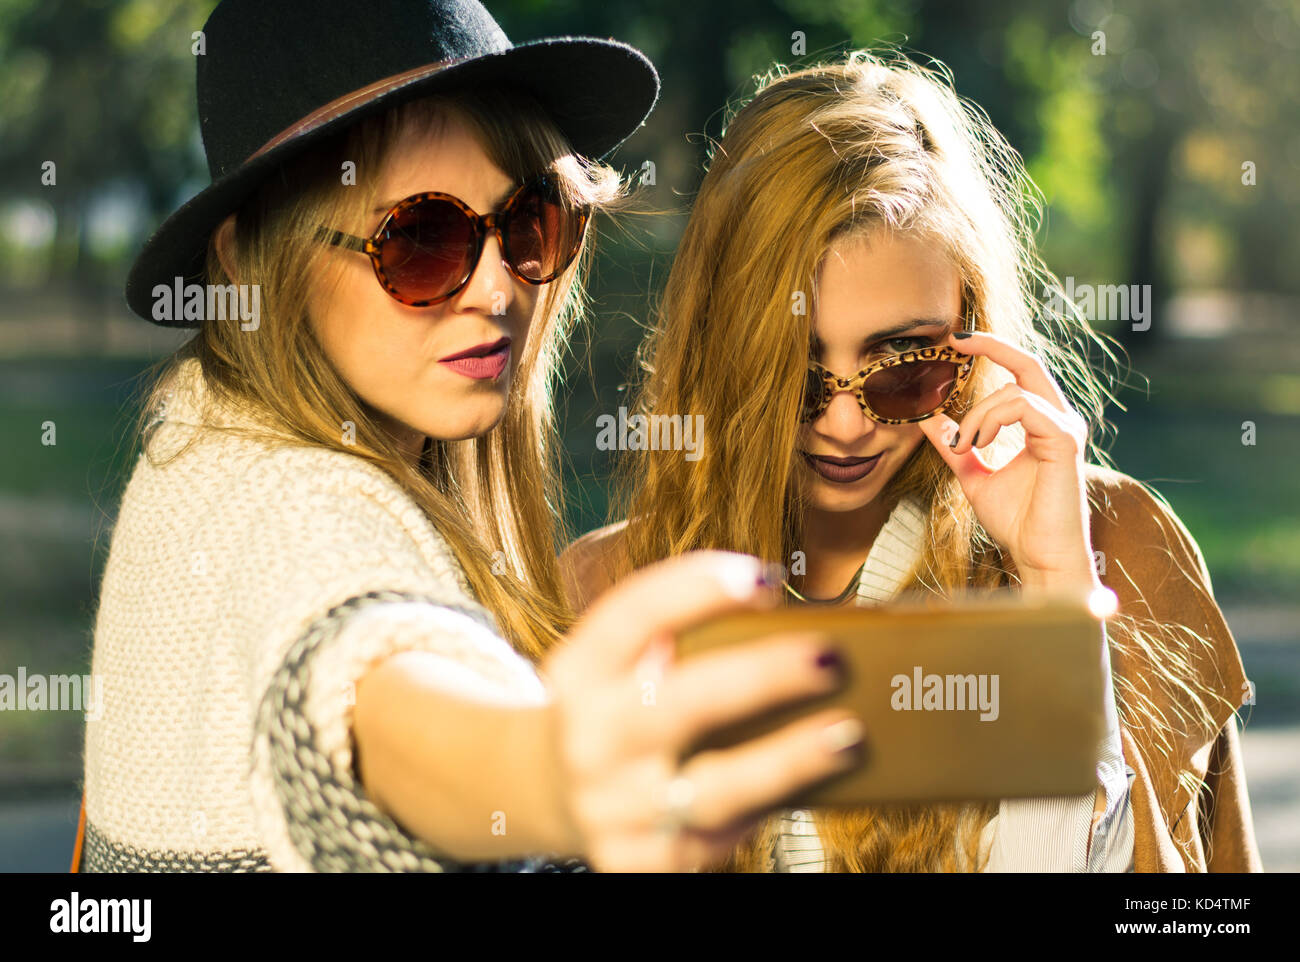 Two girlfriends taking selfie in the park Stock Photo